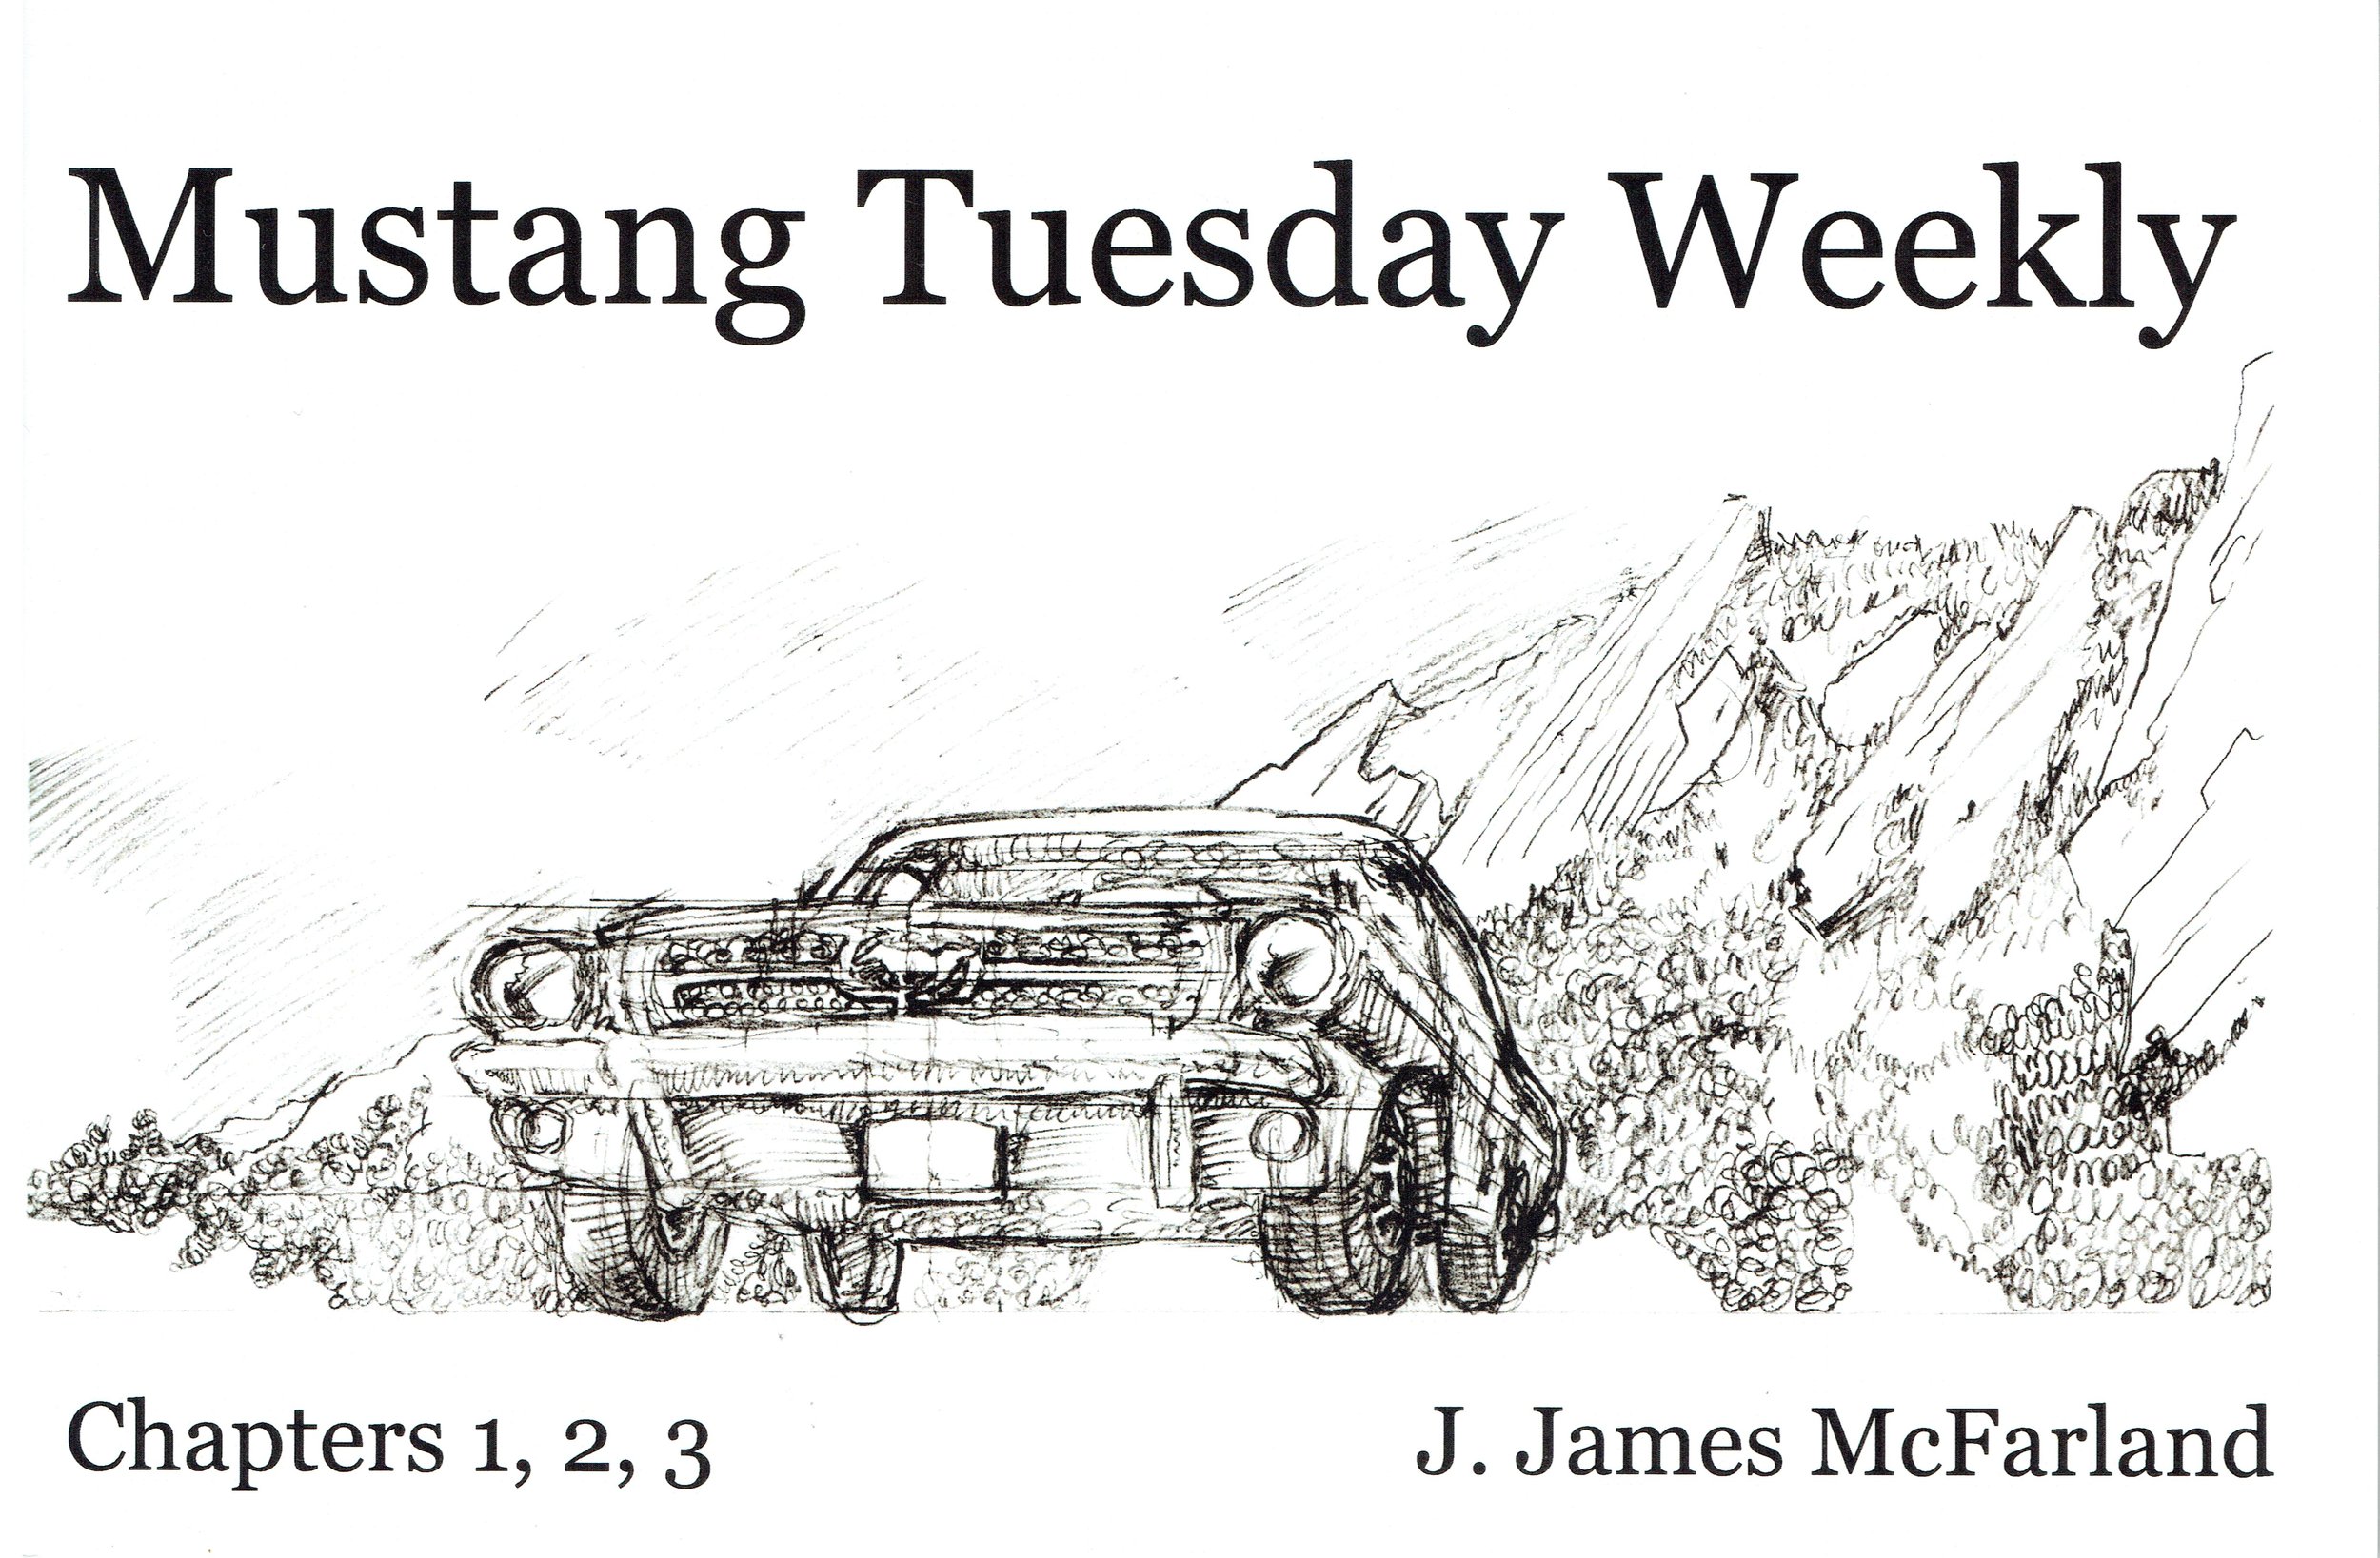 Mustang Tuesday Weekly - Chapters 1,2,3